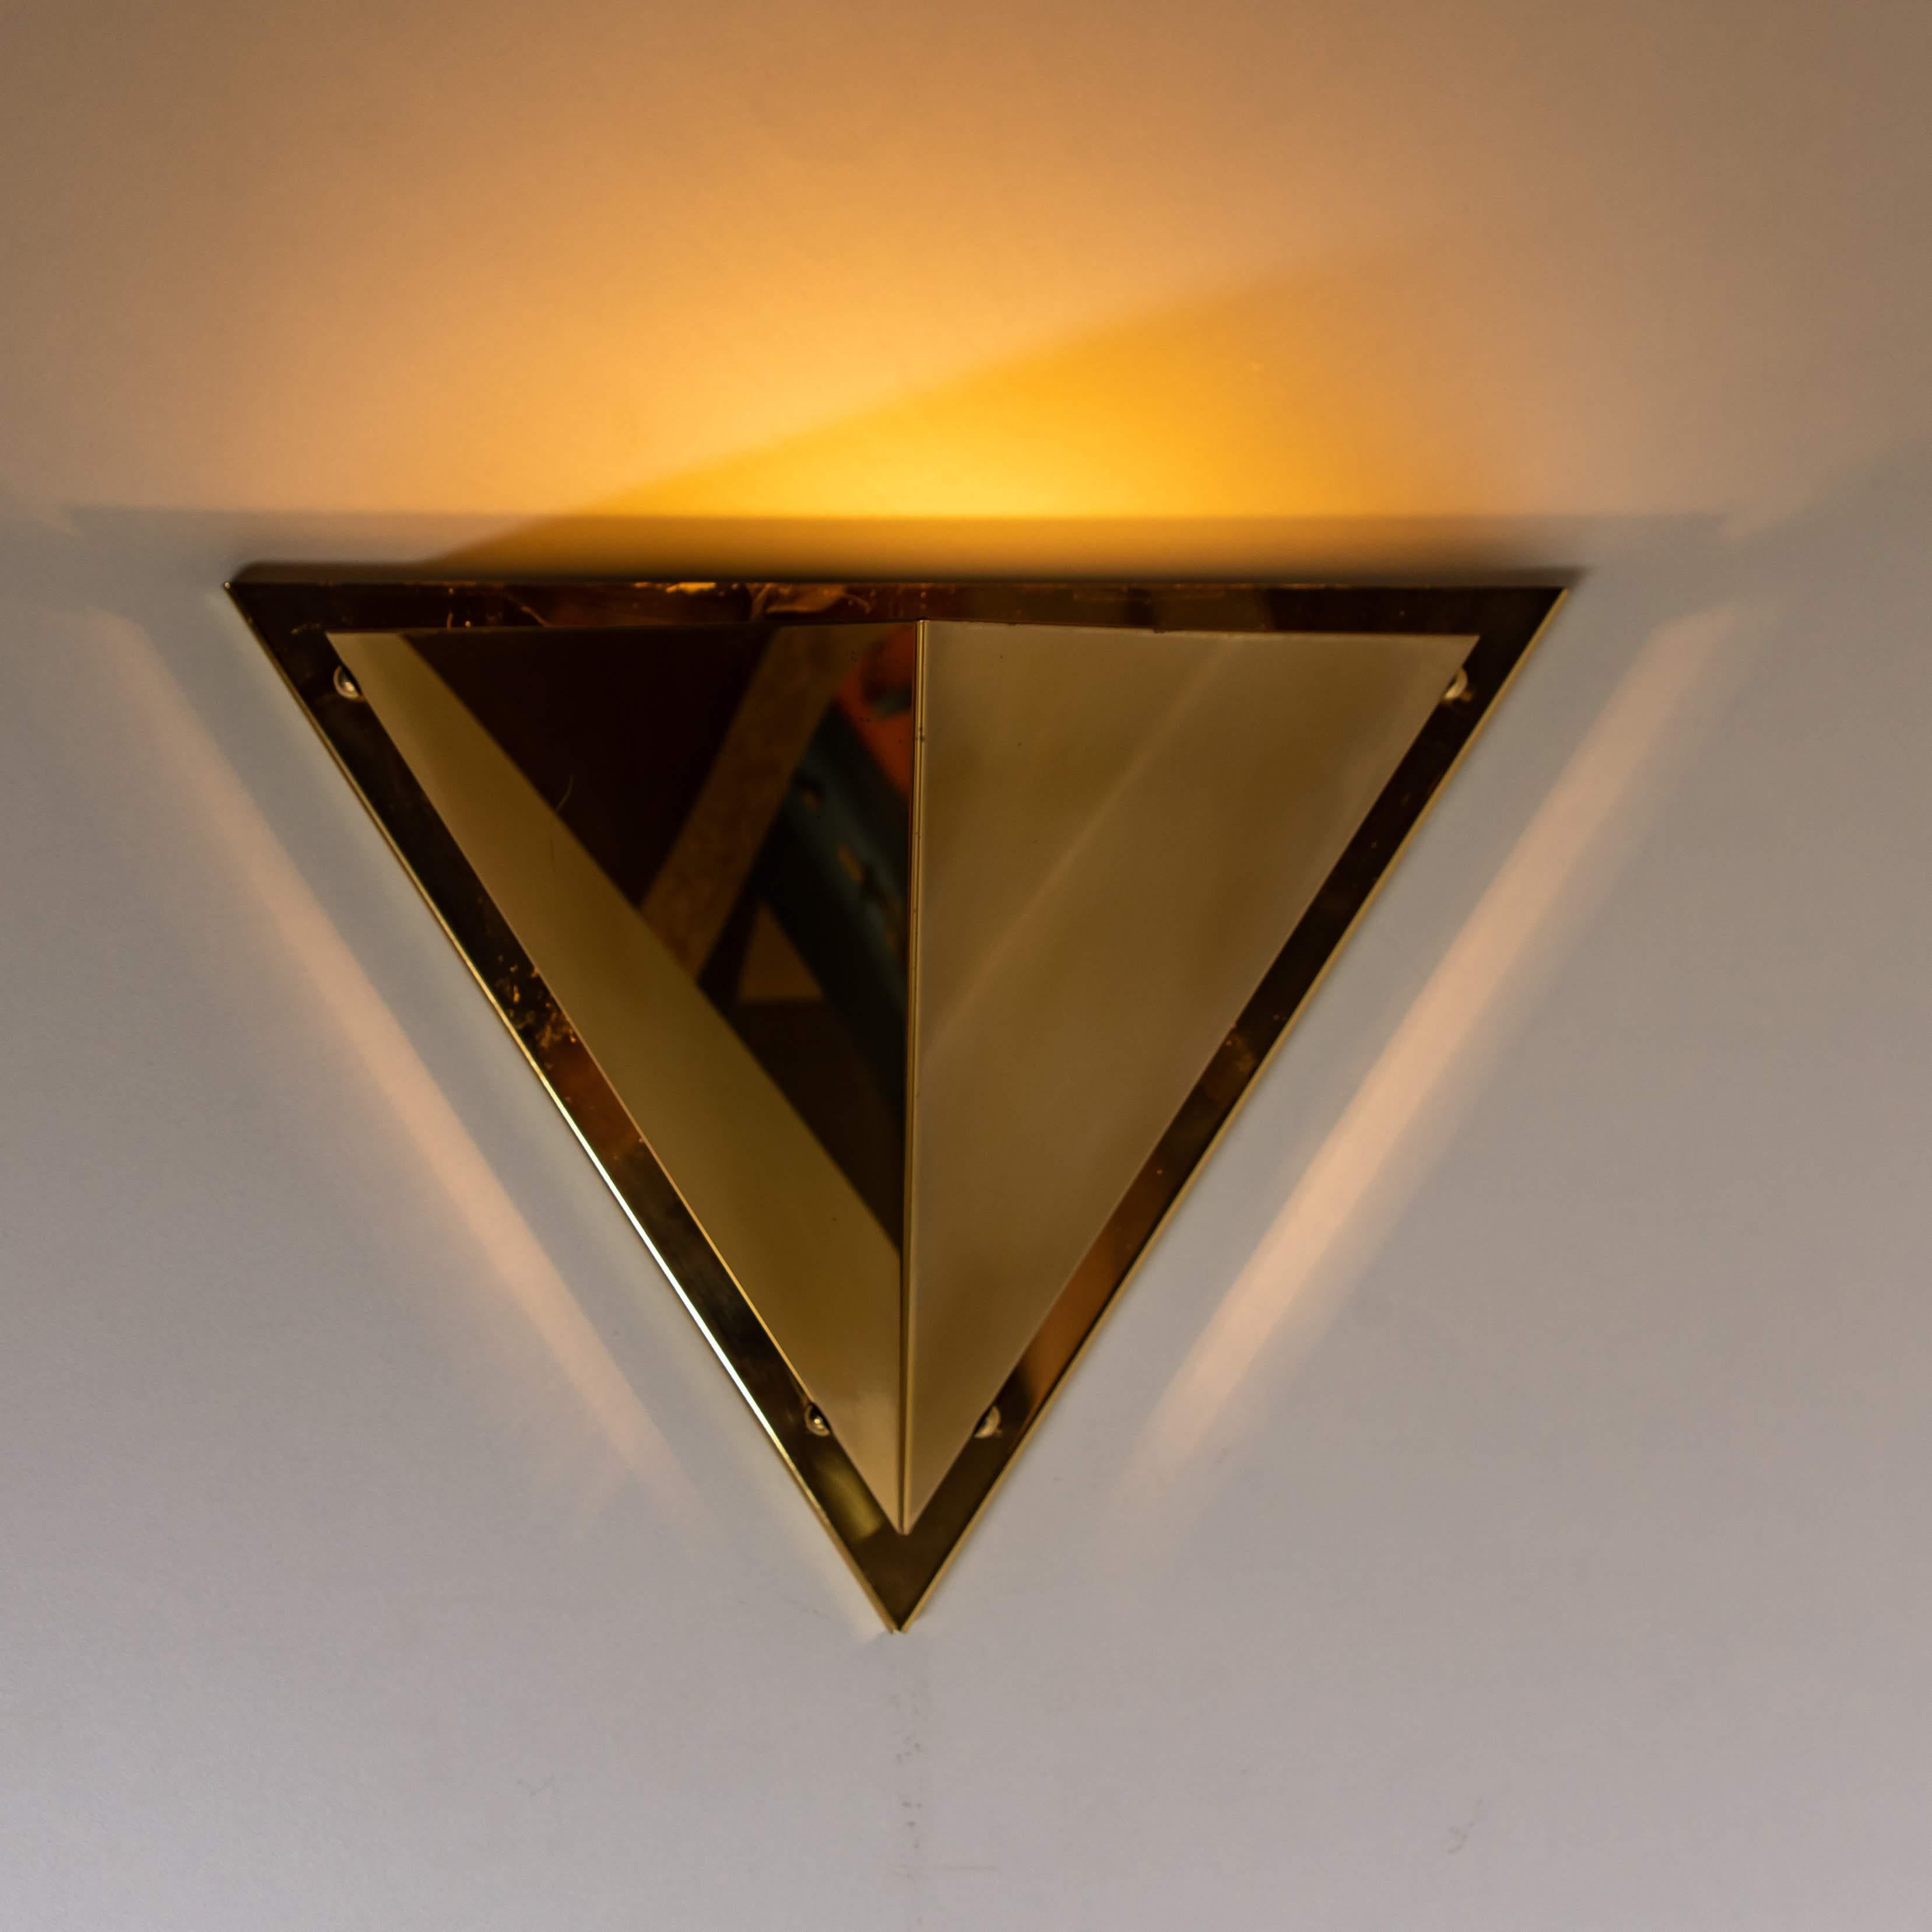 One of the five pyramid shaped brass wall lamps, 1970. Each wall light consist brass shades, which are held with brass screws on a brass frame. The wall light creates beautiful warm light partition upwards and on the side of the wall.

Please notice